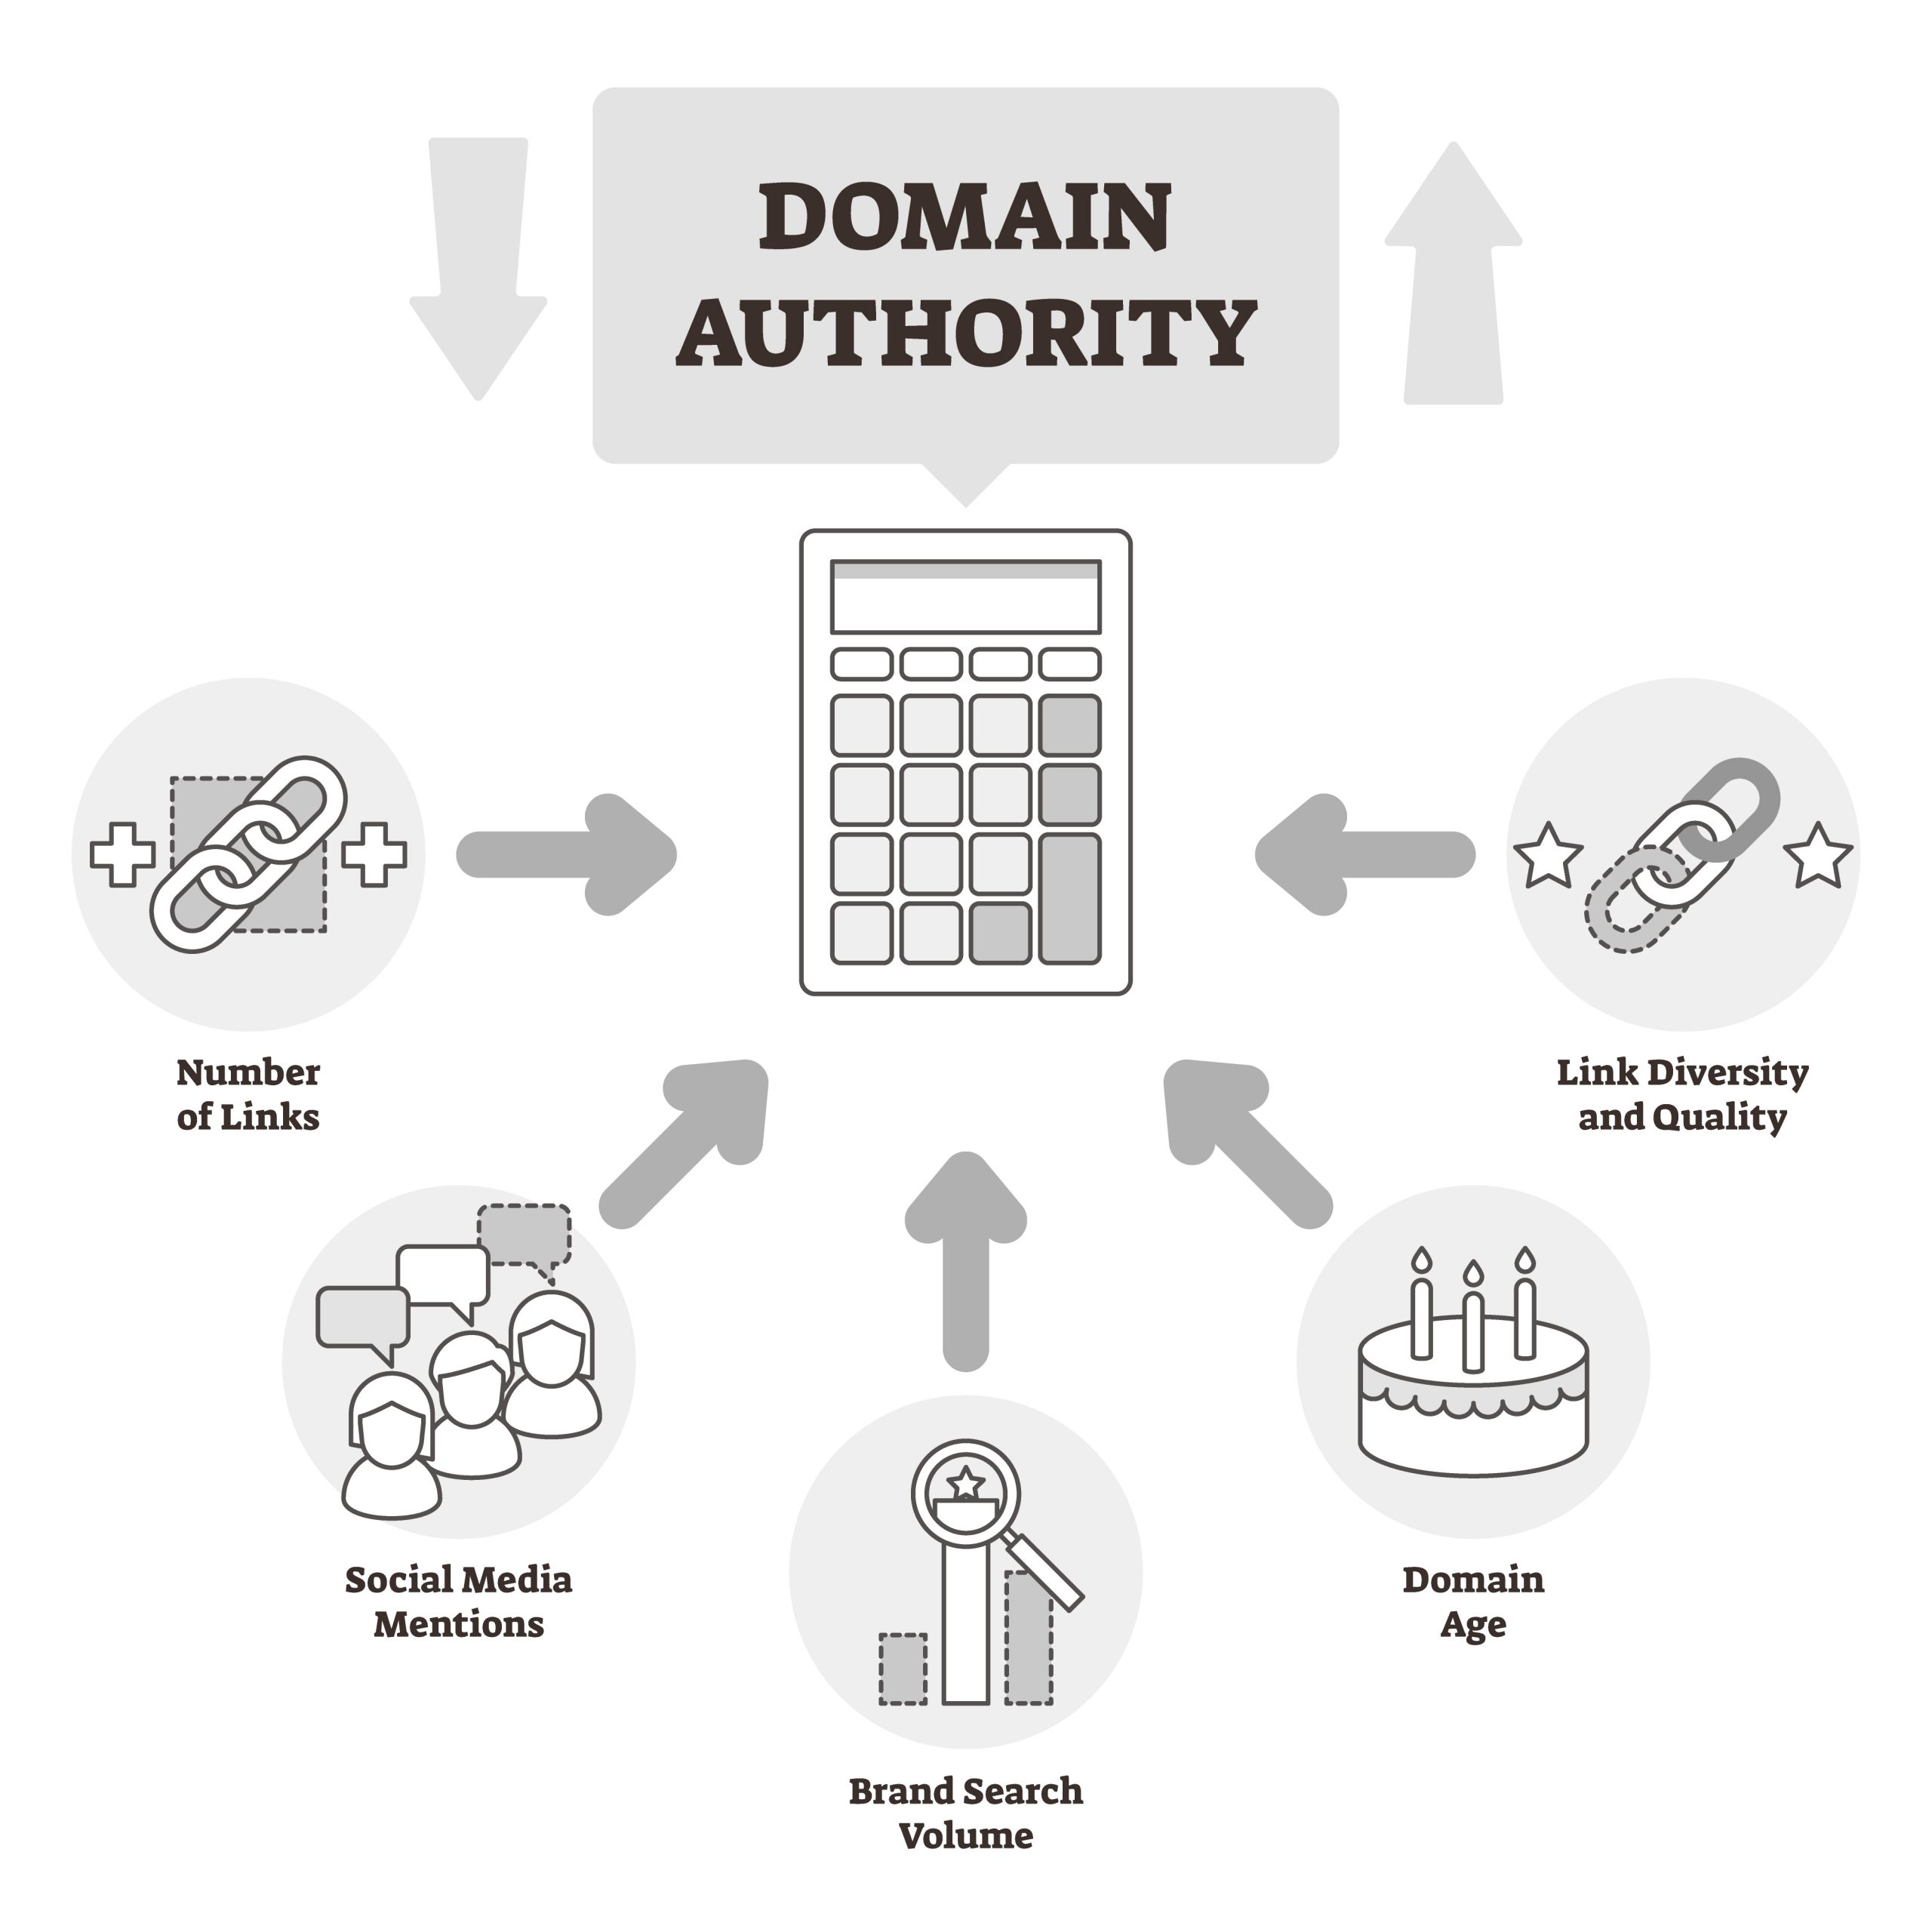 Check Your Domain Authority